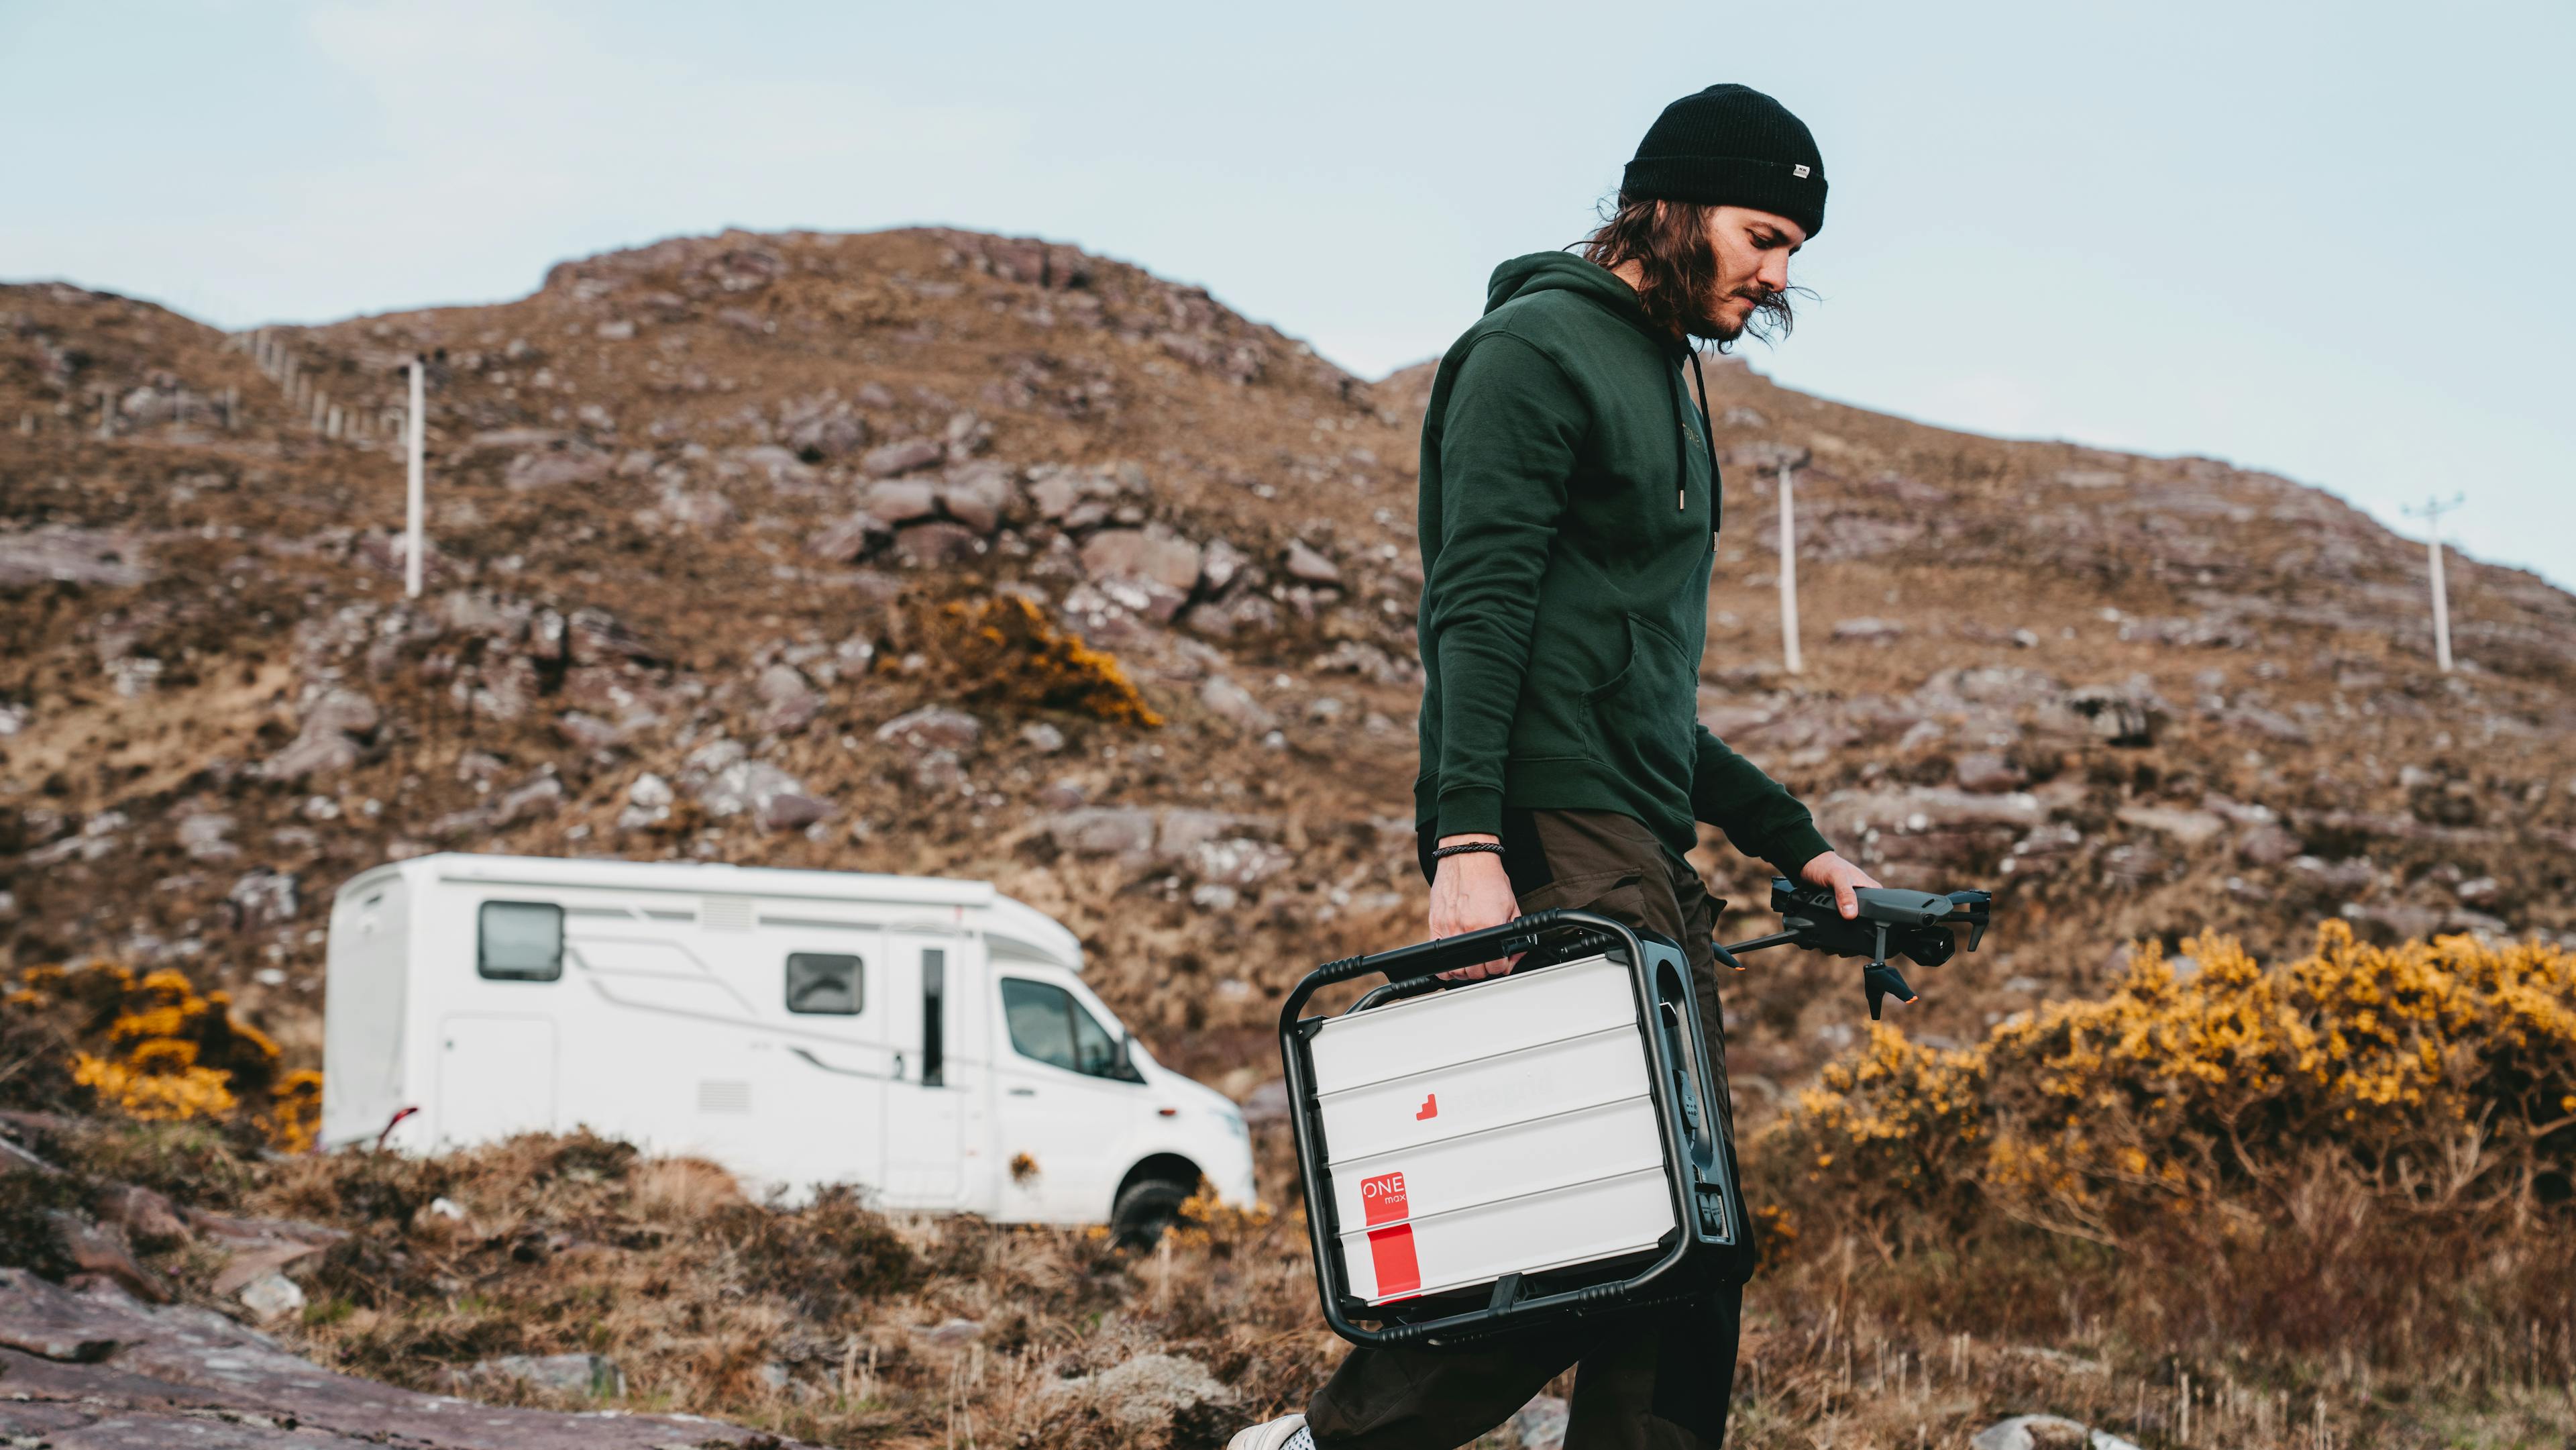 instagrid ONE max being carried by Ron from Convary content creation agency along with a drone in the other hand in rural, off-grid area of Scotland